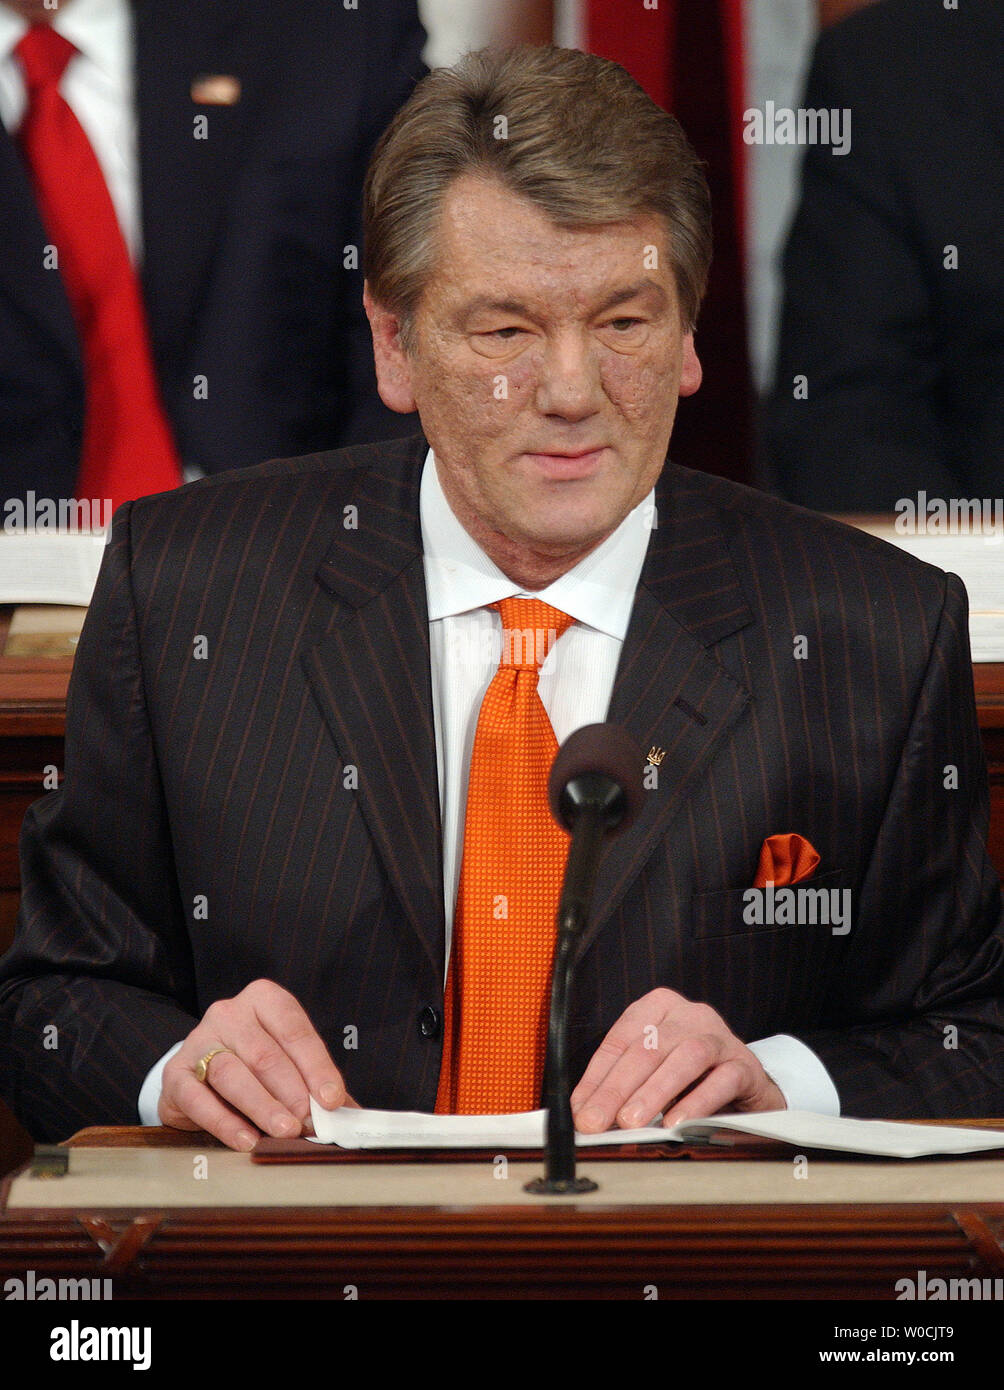 Ukrainian President Viktor Yushchenko speaks to a Joint Session of Congress in the Capitol in Washington on April 6, 2006.    (UPI Photo/Roger L. Wollenberg) Stock Photo